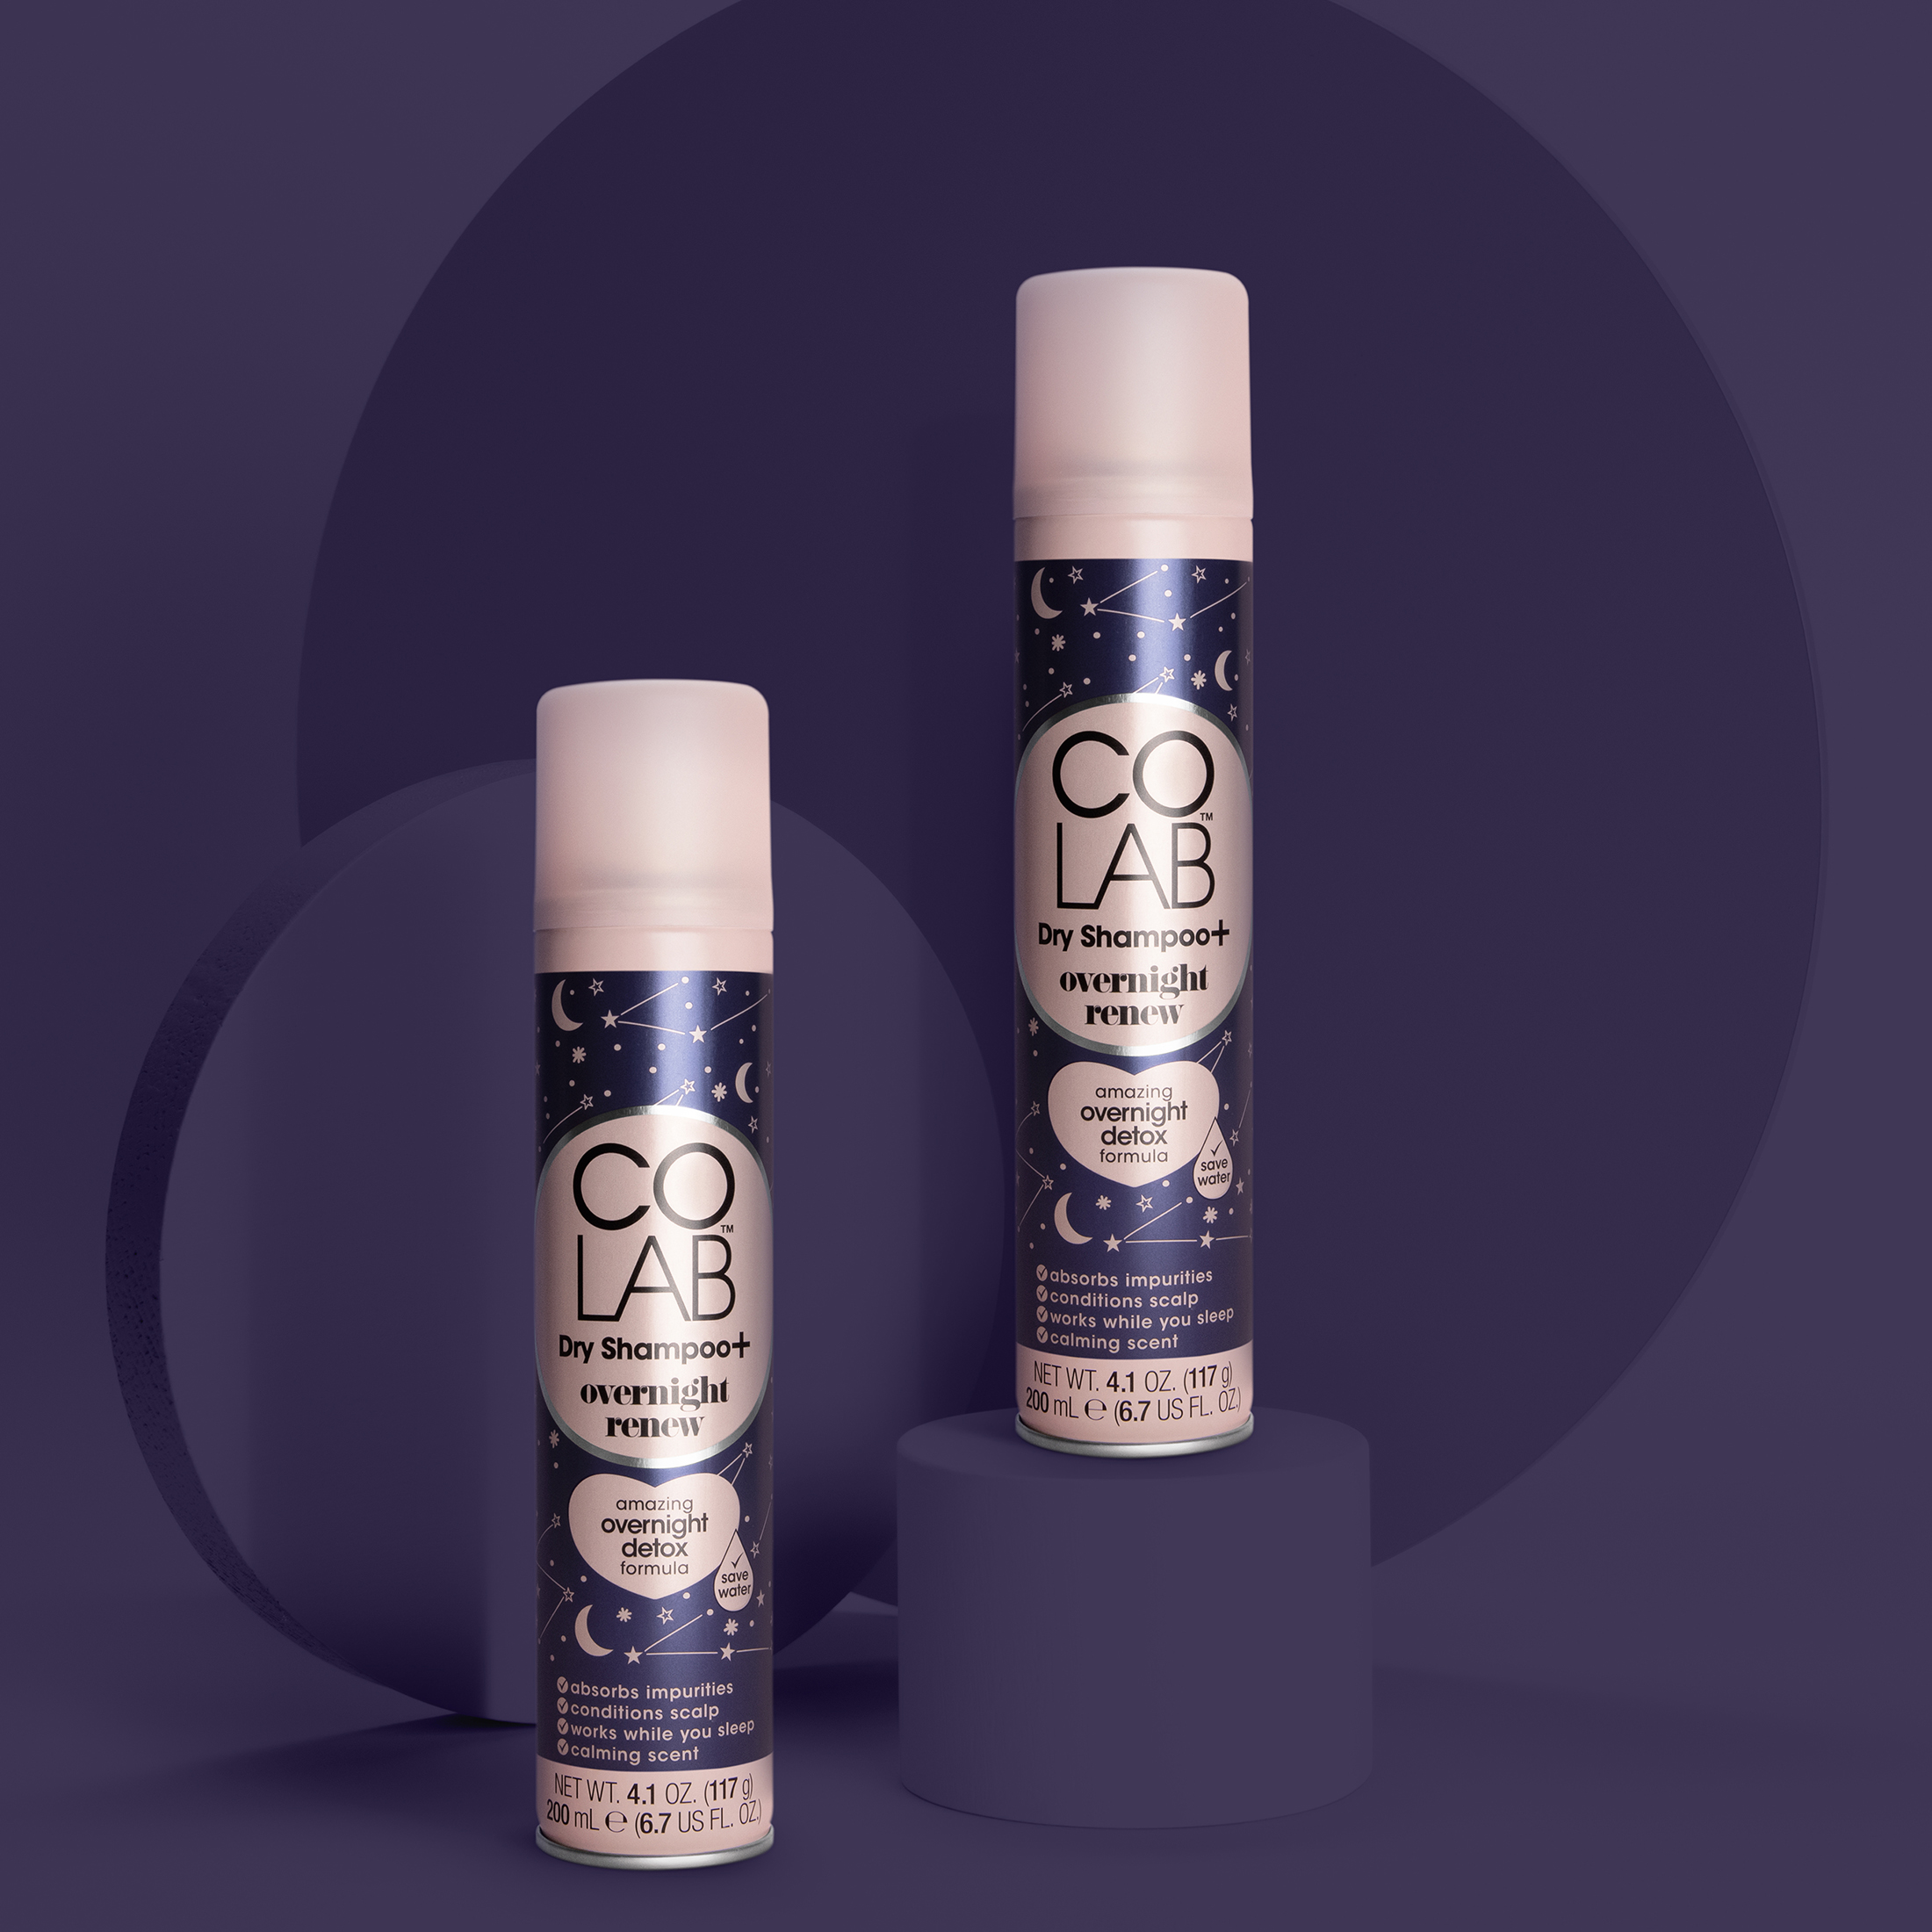 COLAB Dry + Shampoo Overnight Renew Oil Control with Lavender, 6.7 fl oz - image 5 of 6